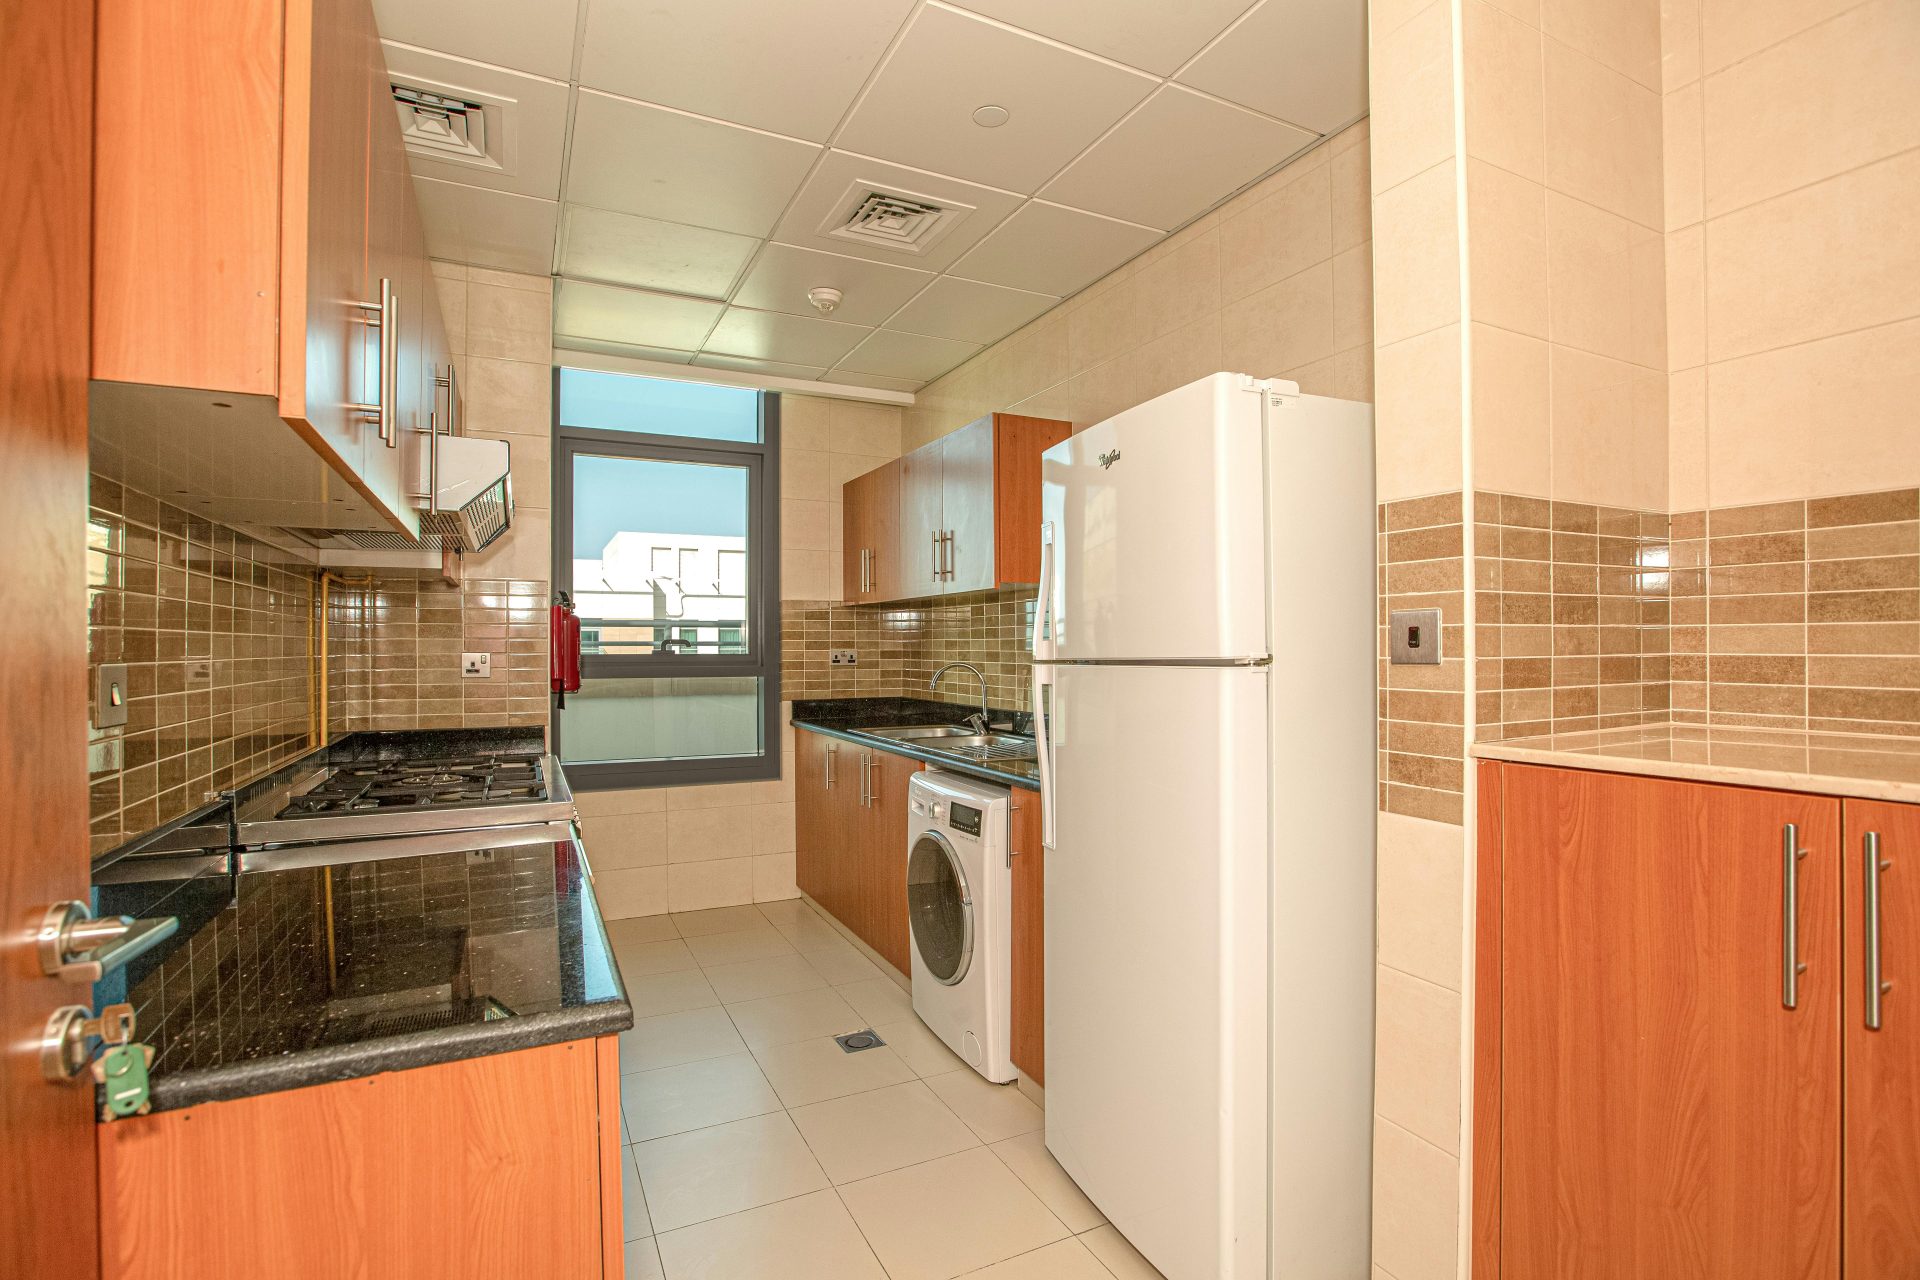 Key Considerations Before Designing Your Galley Kitchen